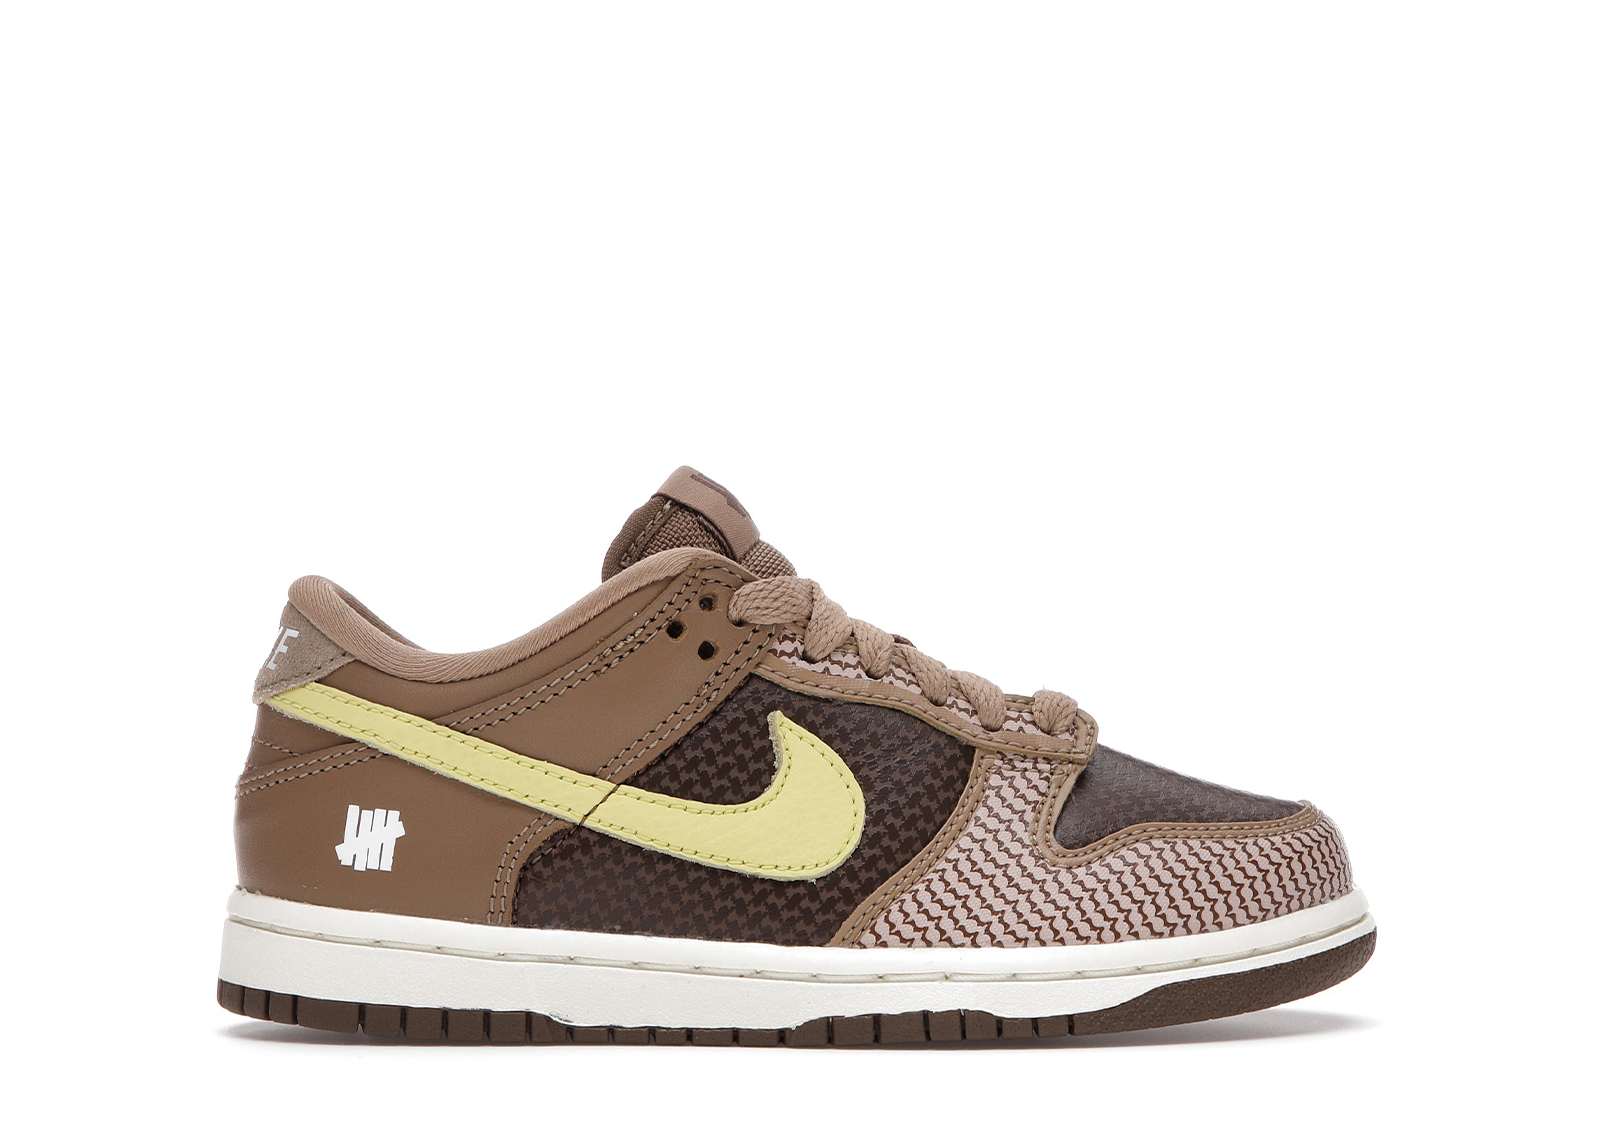 Nike Dunk Low SP Undefeated Canteen Dunk vs. AF1 Pack Men's 